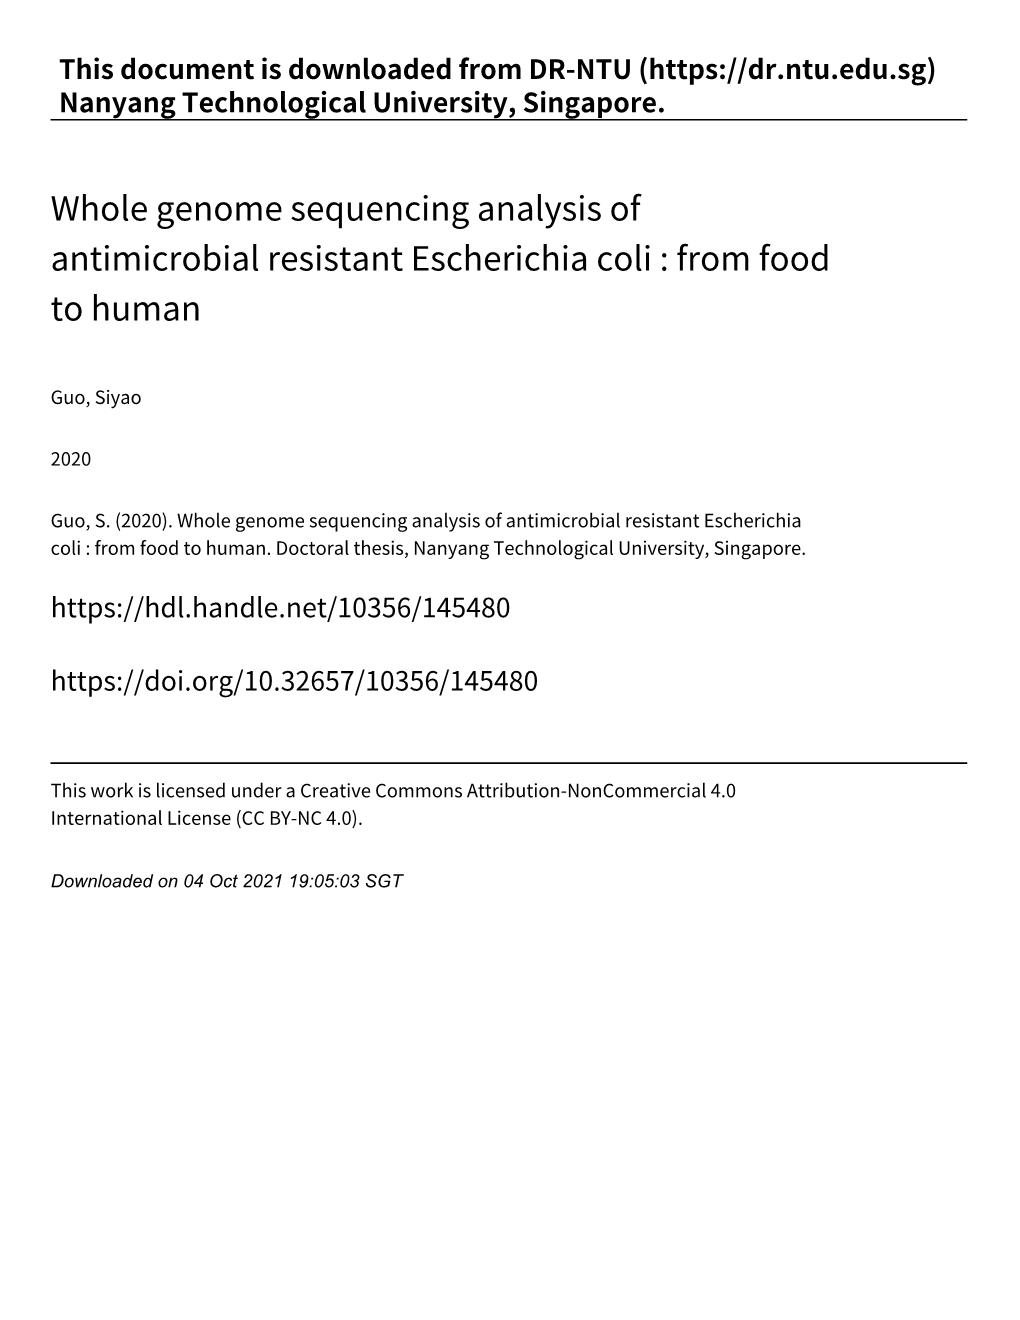 Whole Genome Sequencing Analysis of Antimicrobial Resistant Escherichia Coli : from Food to Human